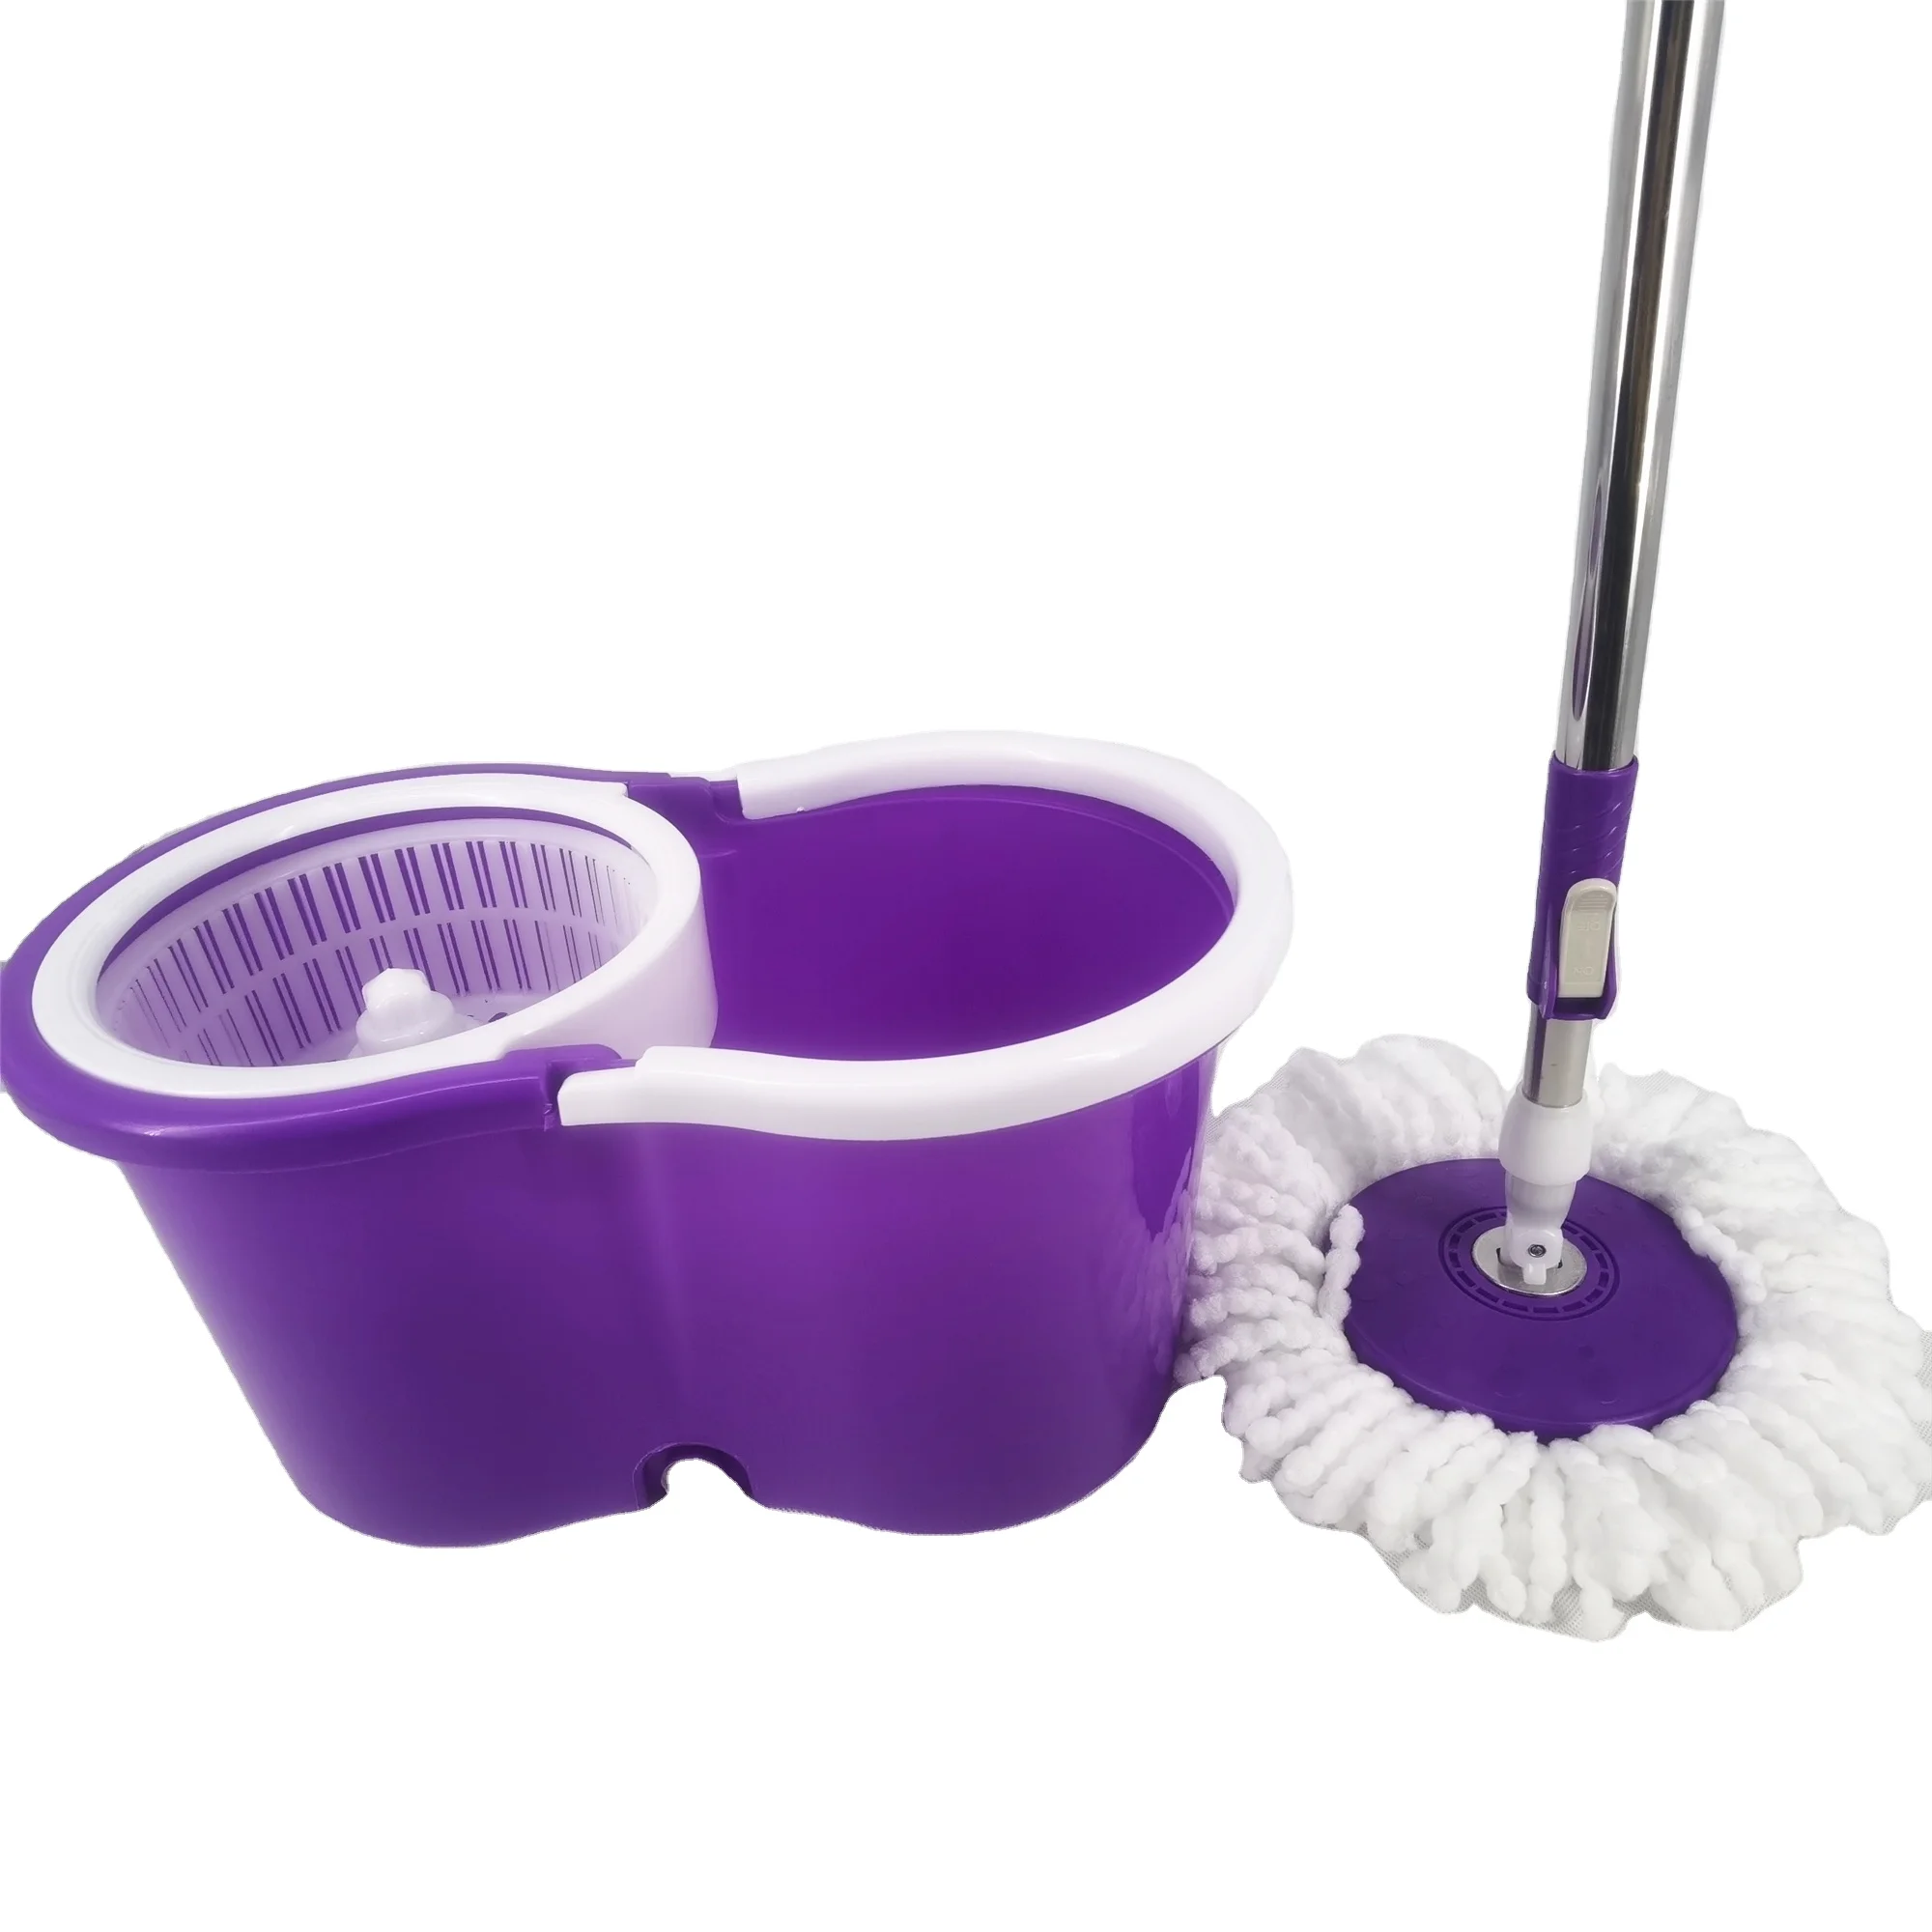 zweep Frons Oswald Jason Made Microfiber Self-washed 360 Rotation Magic Spin Mop - Buy Spin Mop  Gold,Swift Microfiber Mop,360 Degree Spin Mop Product on Alibaba.com